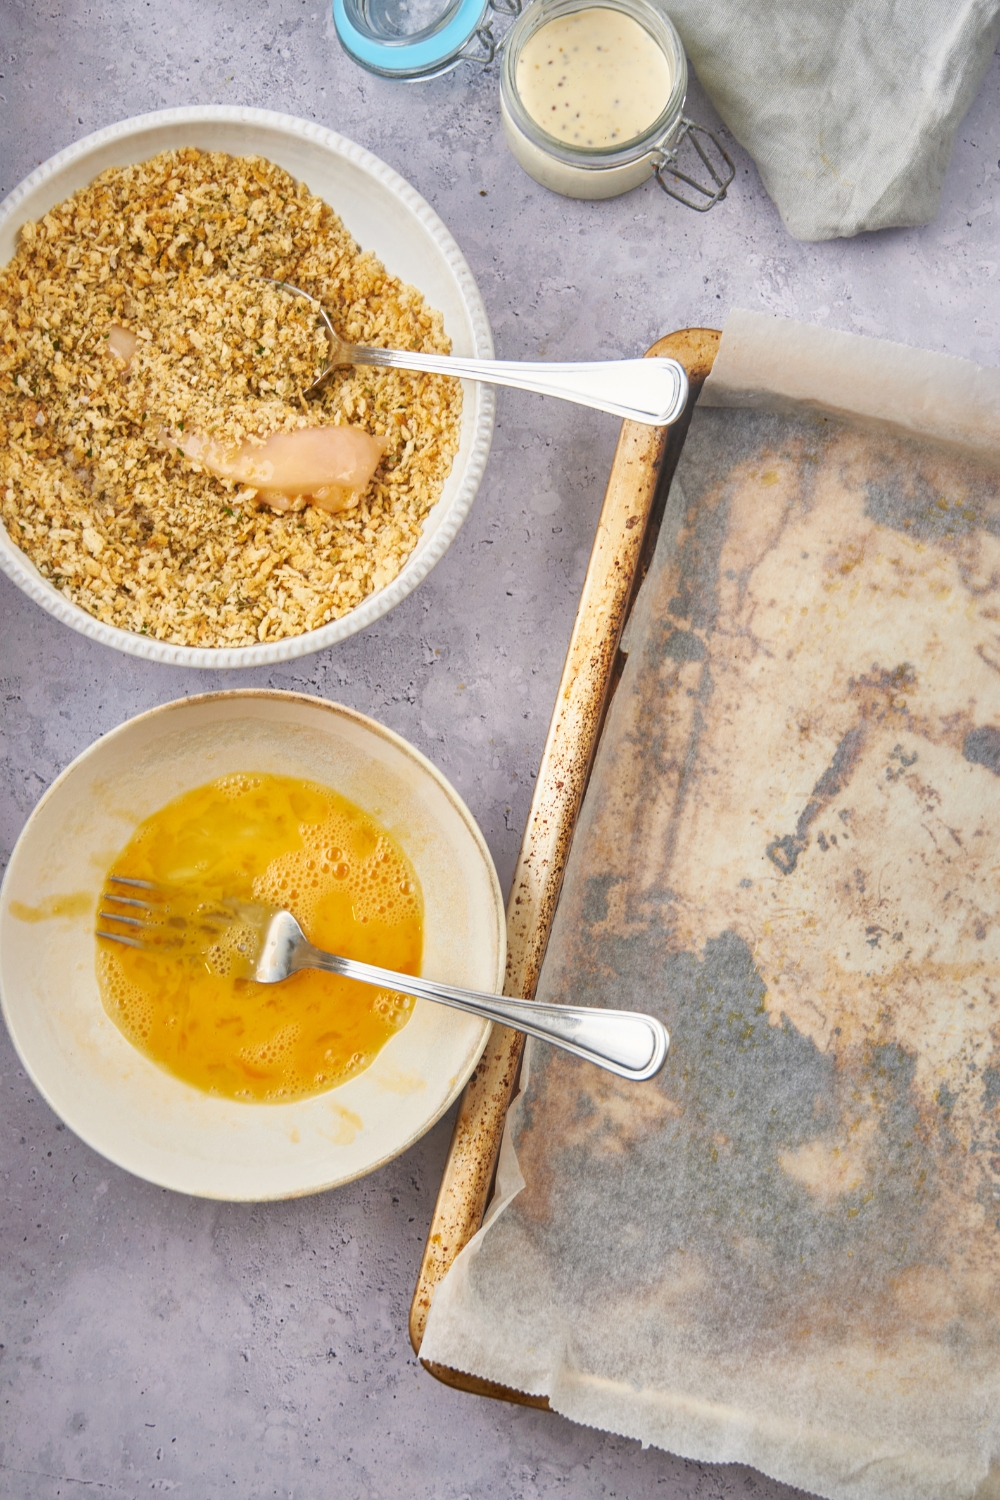 Overhead view of a bowl of panko bread crumbs with a chicken tender being coated using a spoon along with a bowl of beaten eggs and a baking sheet lined with parchment paper.